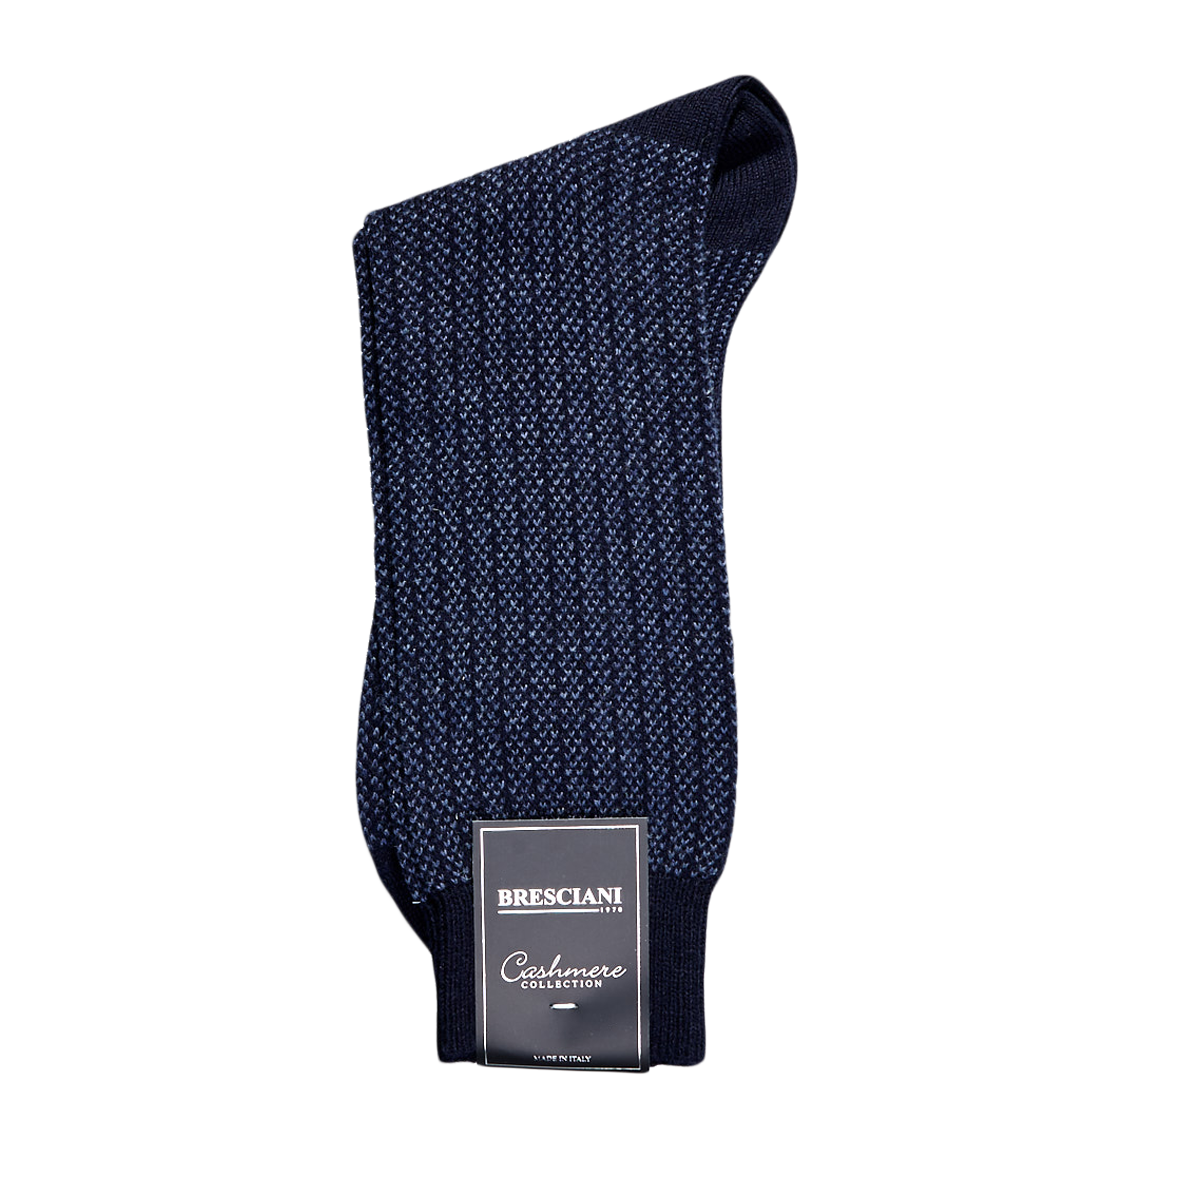 A comfortable Navy Blue Structured Cashmere Sock with a tag on it, made by Bresciani.